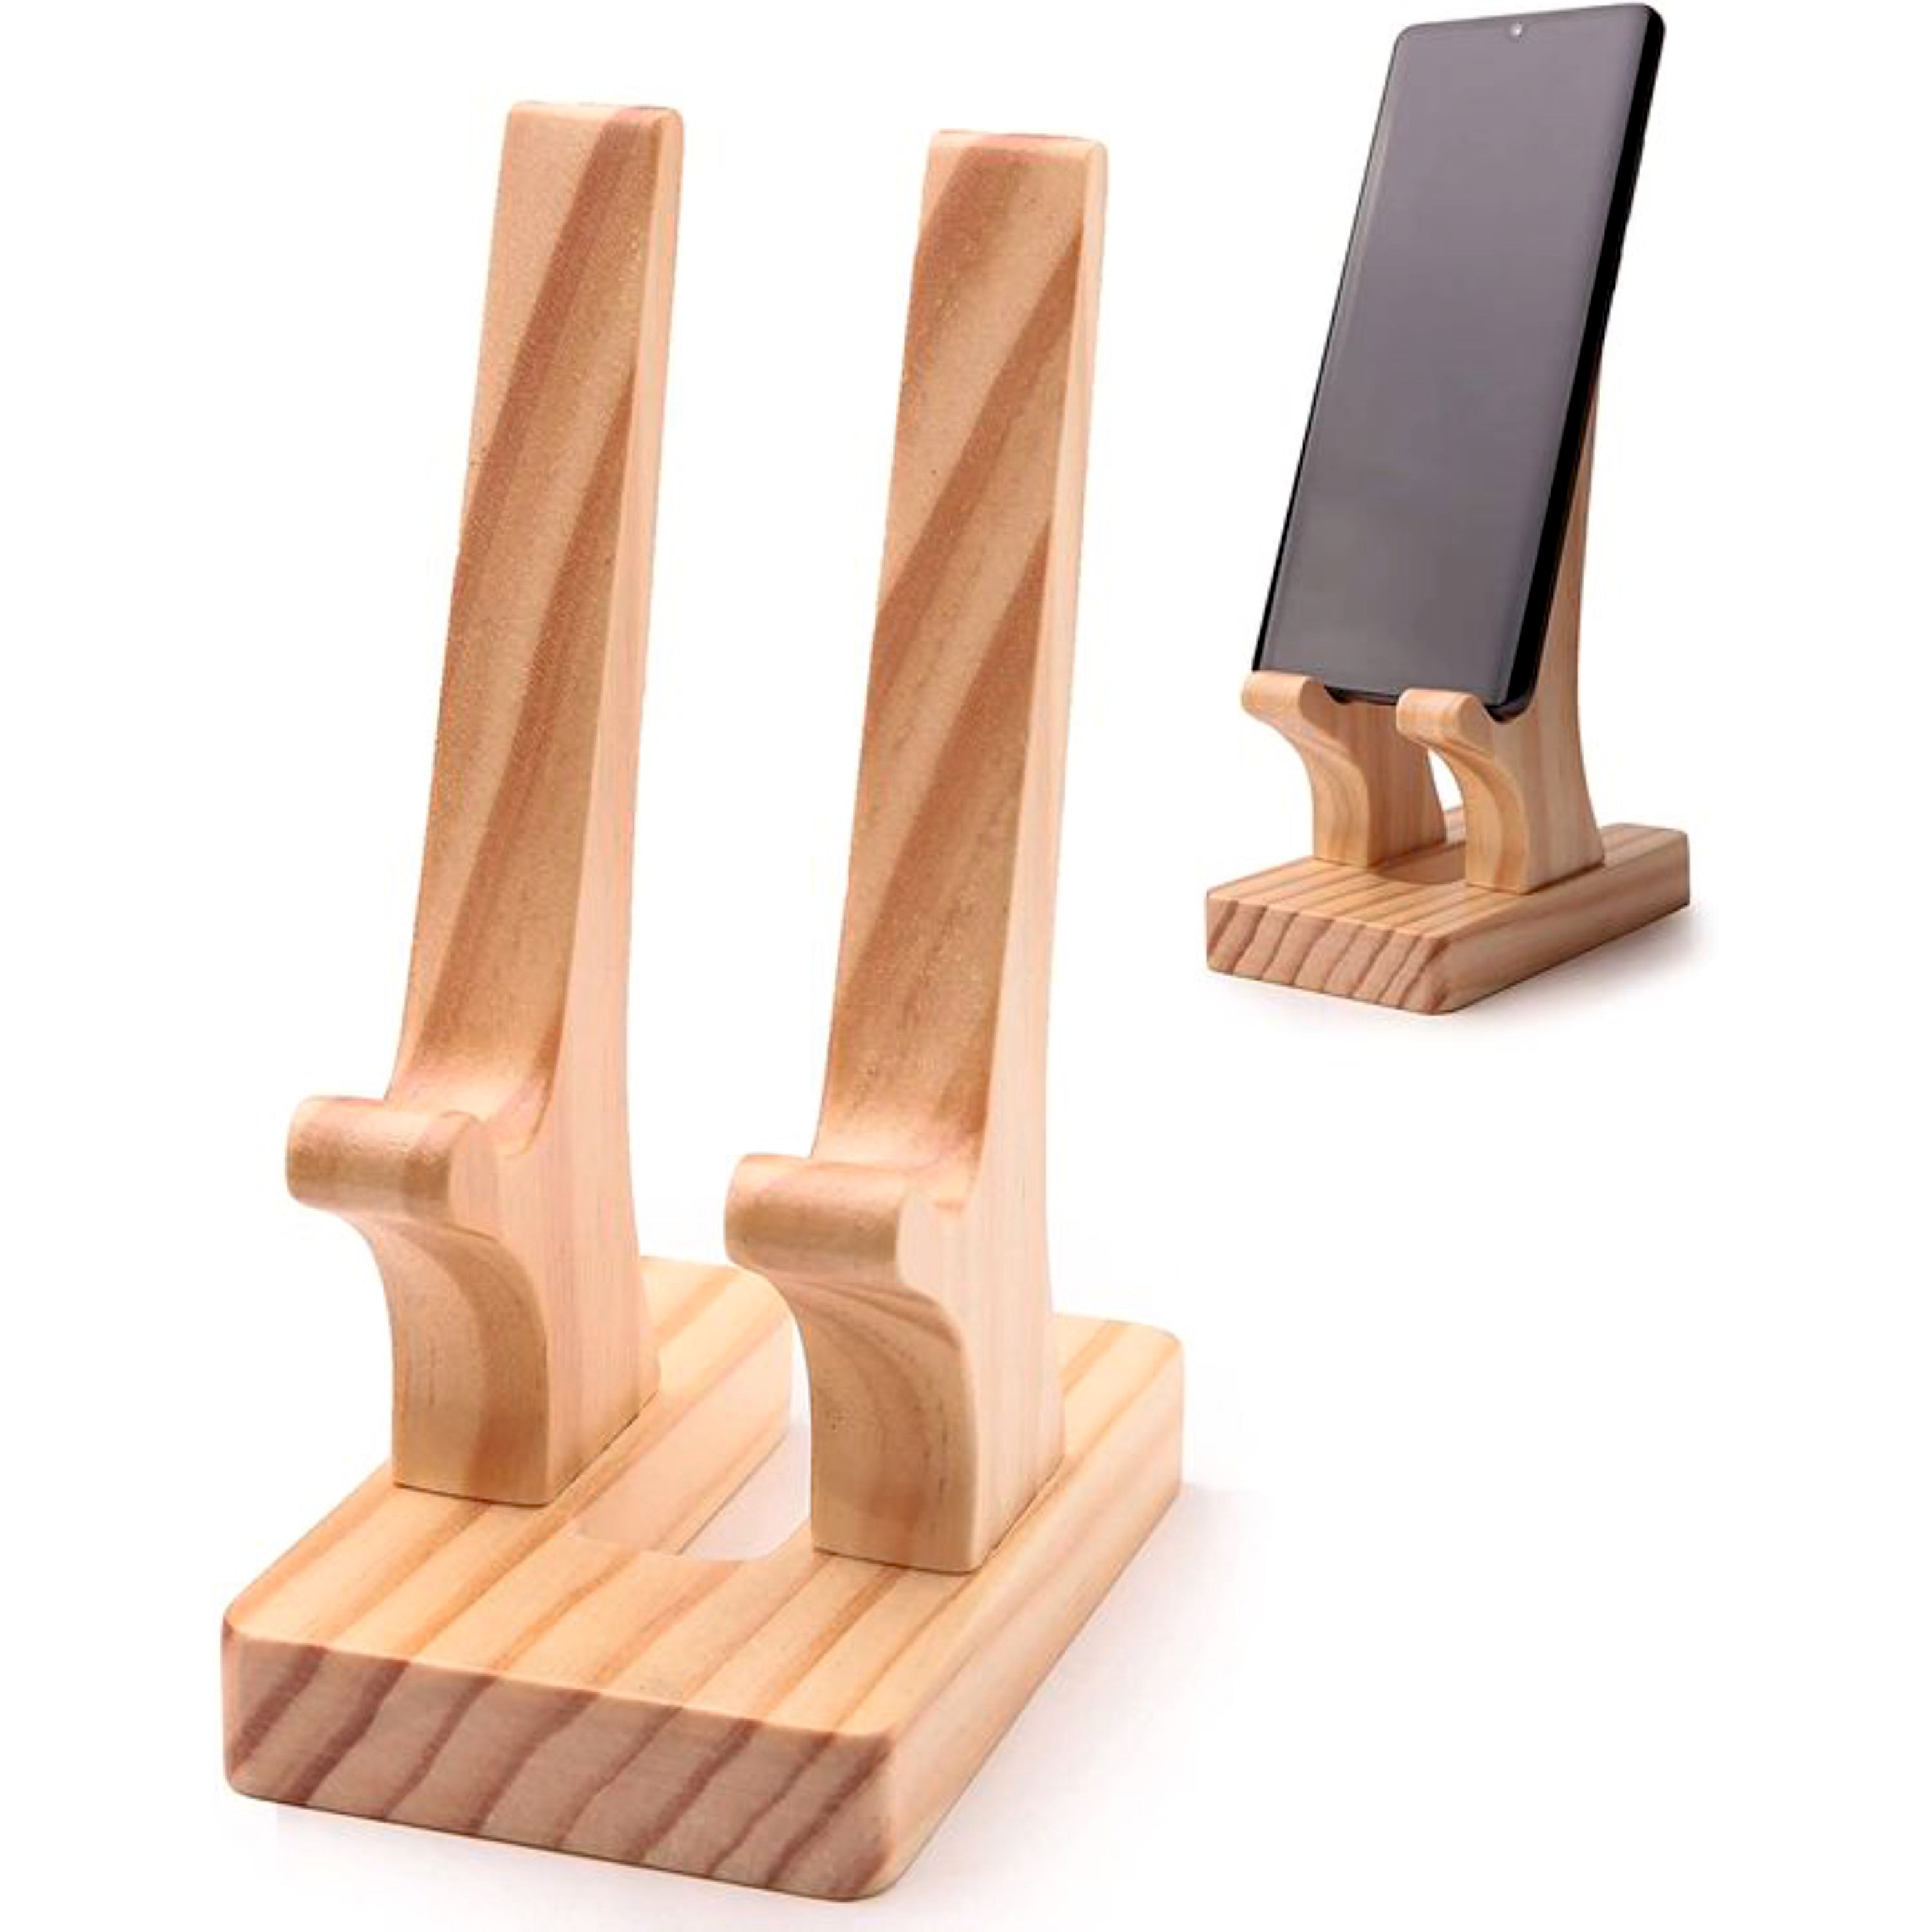 Pillars - Cell Phone Holder (Pack of 3 Piece)